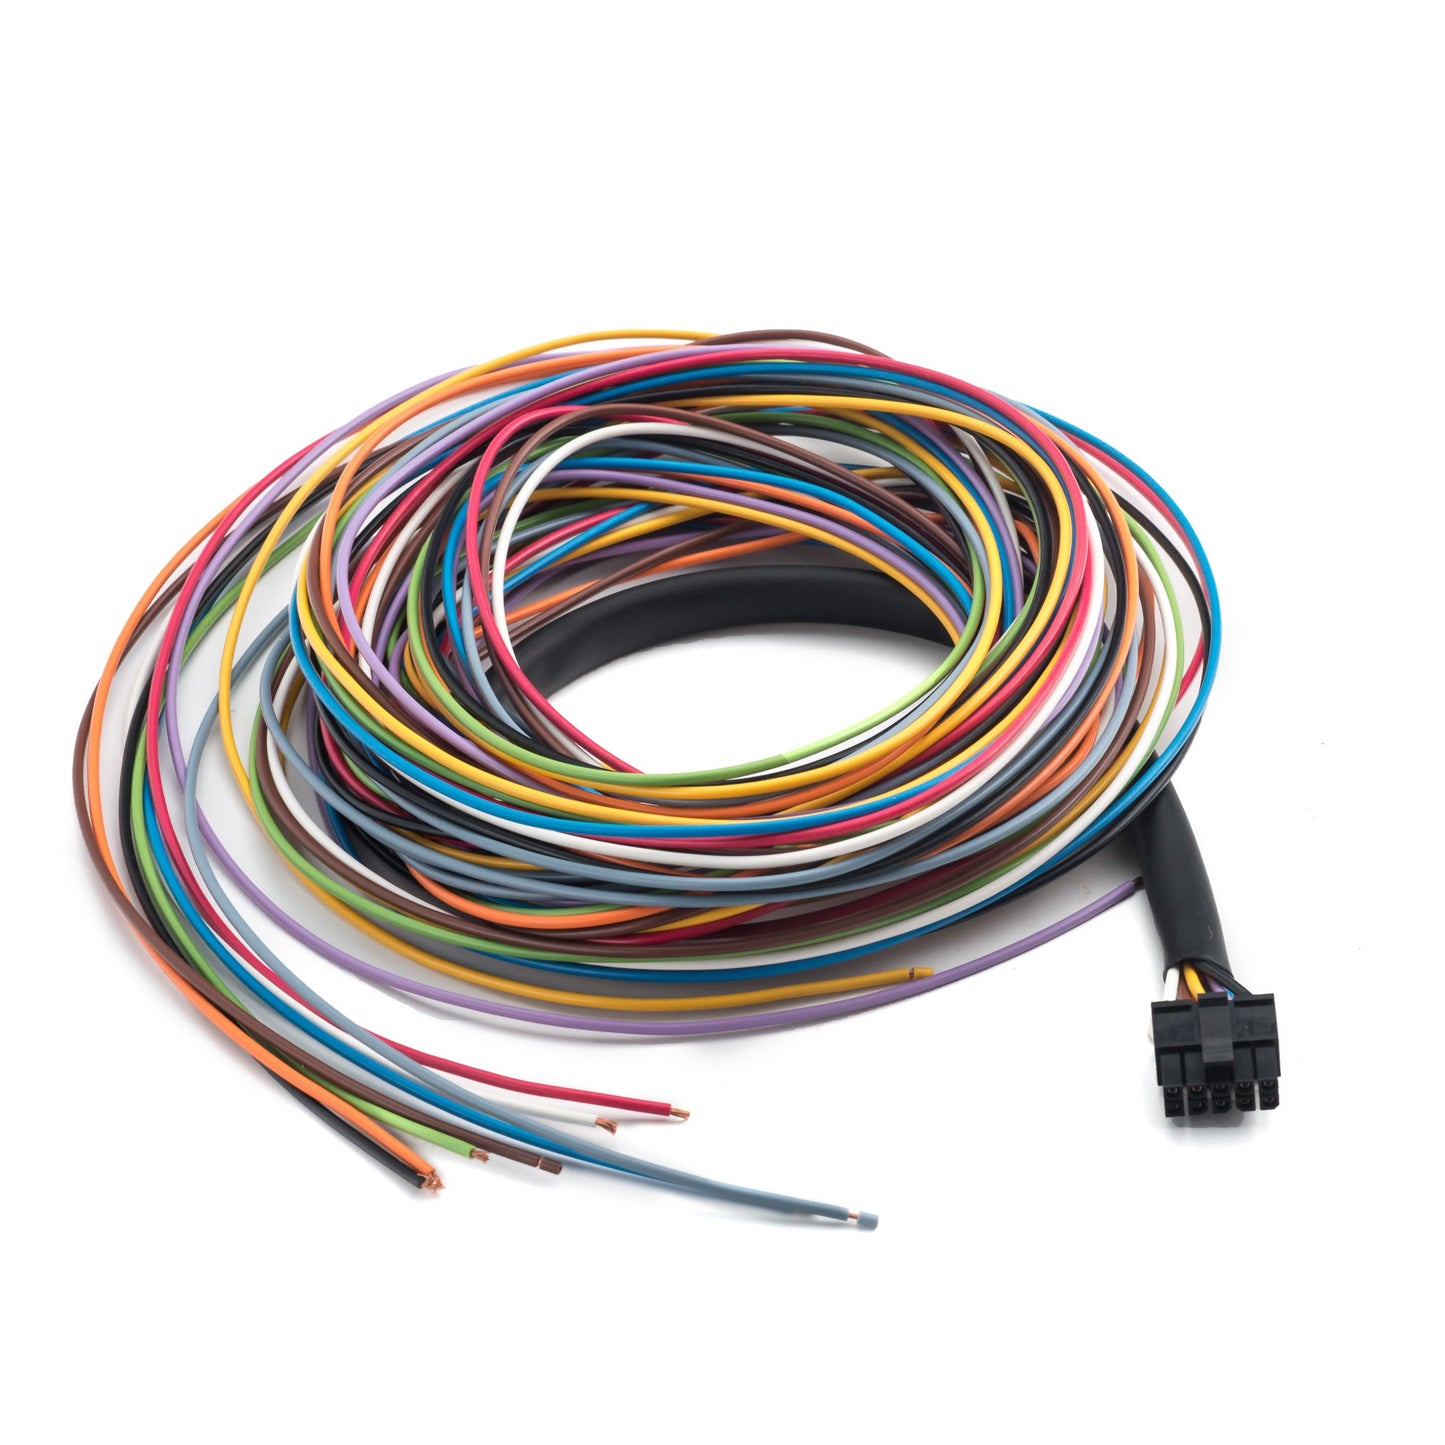 EMS1+2 Wiring Harness (10pin) 2.5 Meters (10ft)\n\nNote: This is for the discontinued EMS1 or EMS2 unit